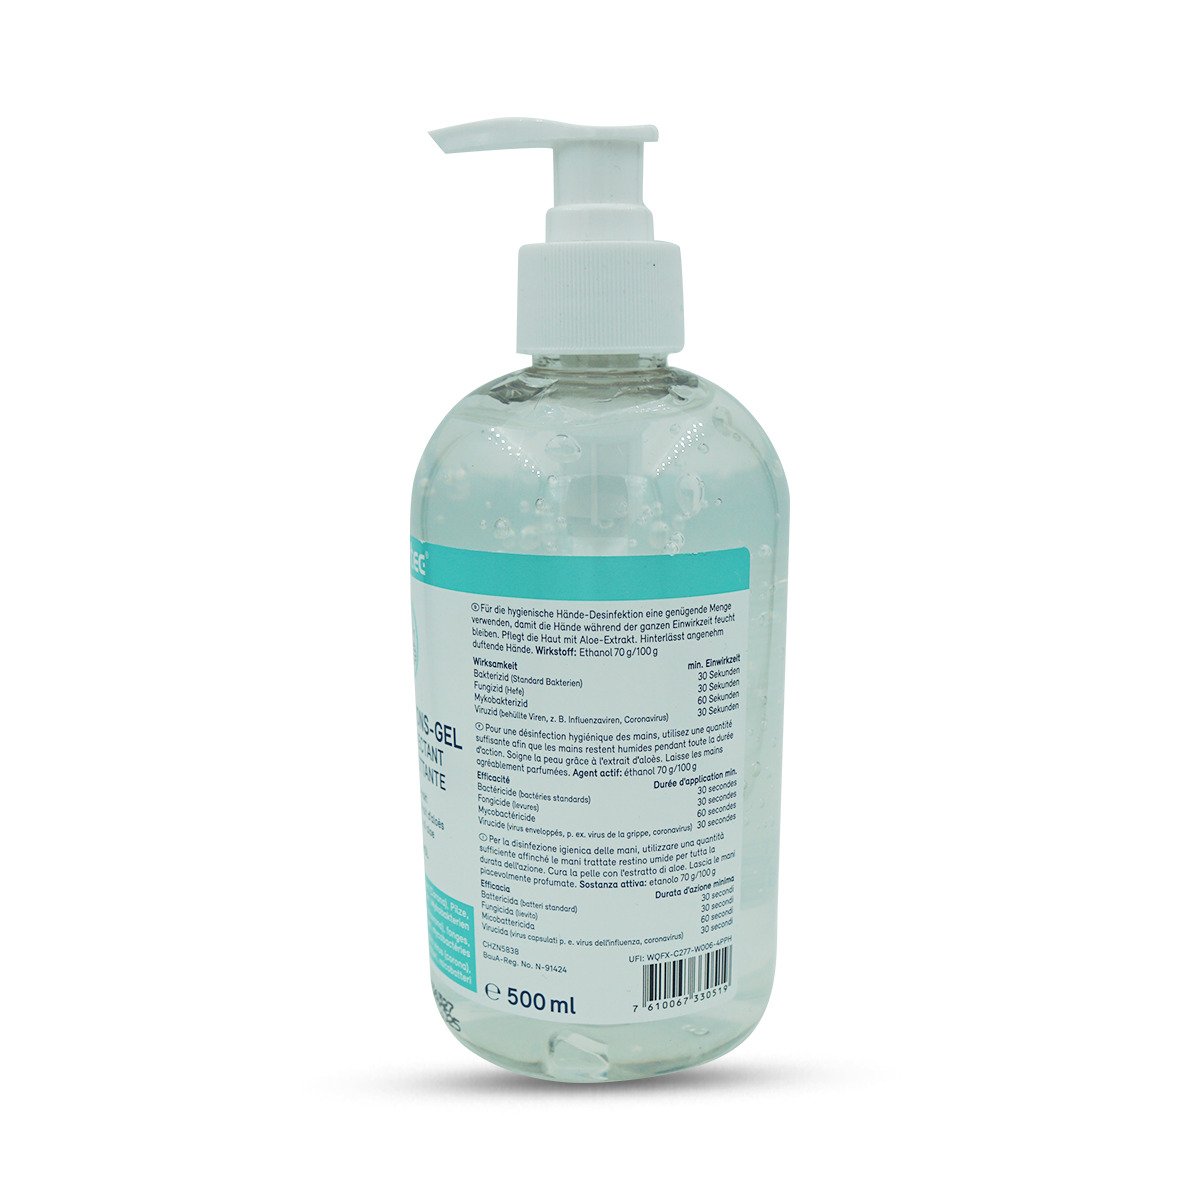 Hand disinfectant gel with pump